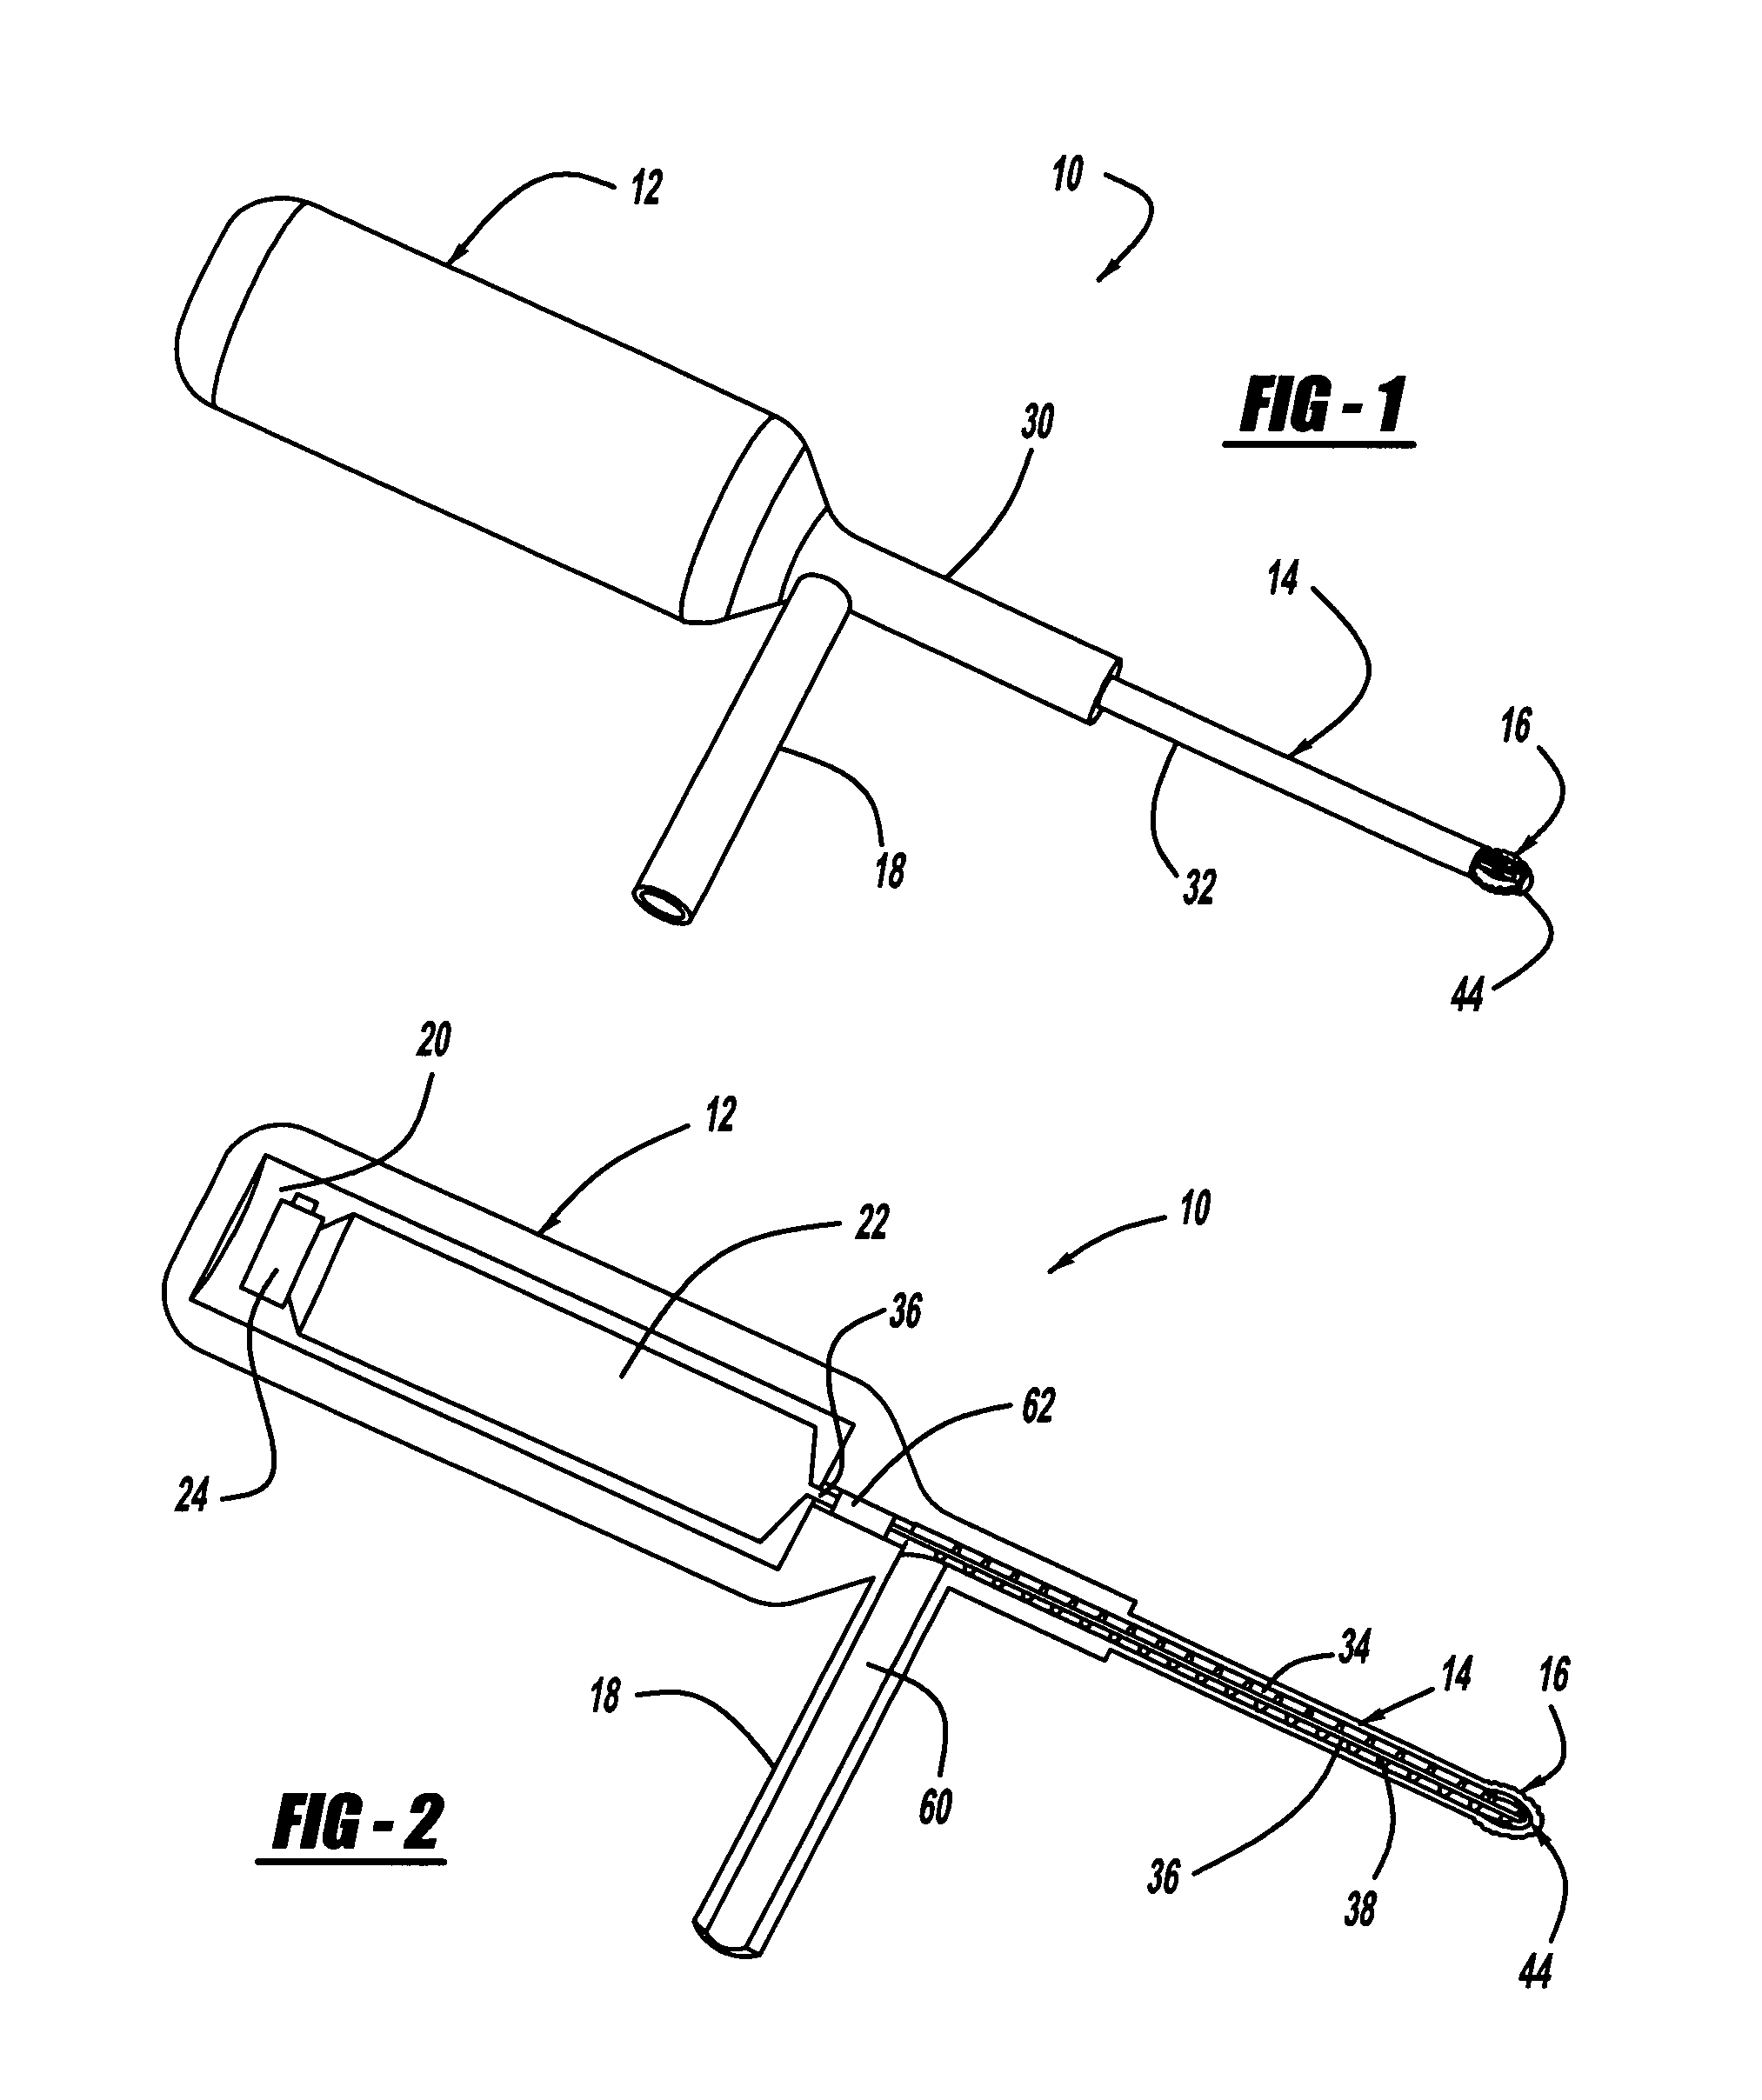 Disc space preparation device for spinal surgery